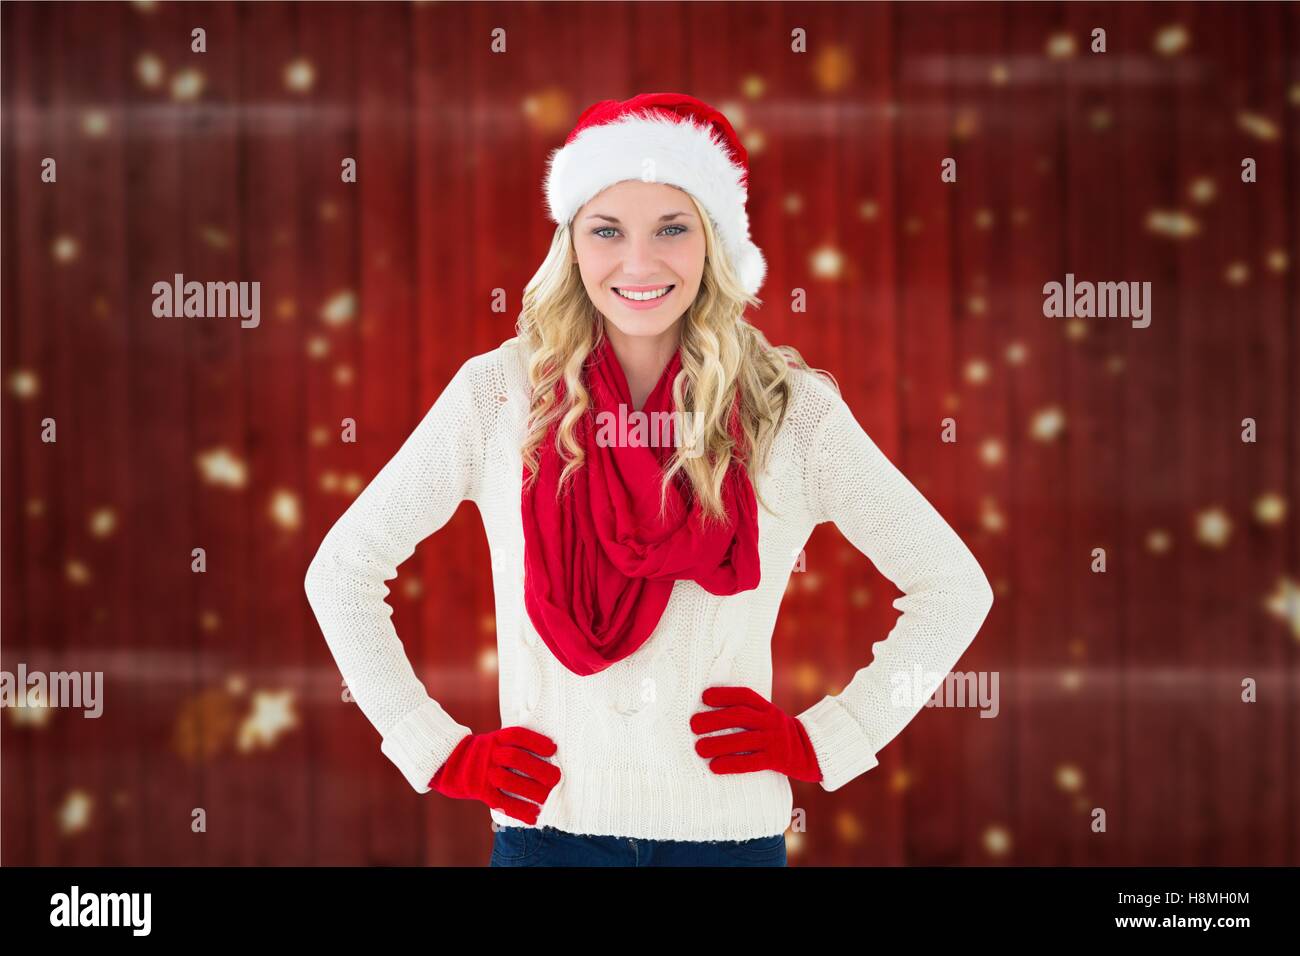 Portrait of smiling woman in santa hat Stock Photo